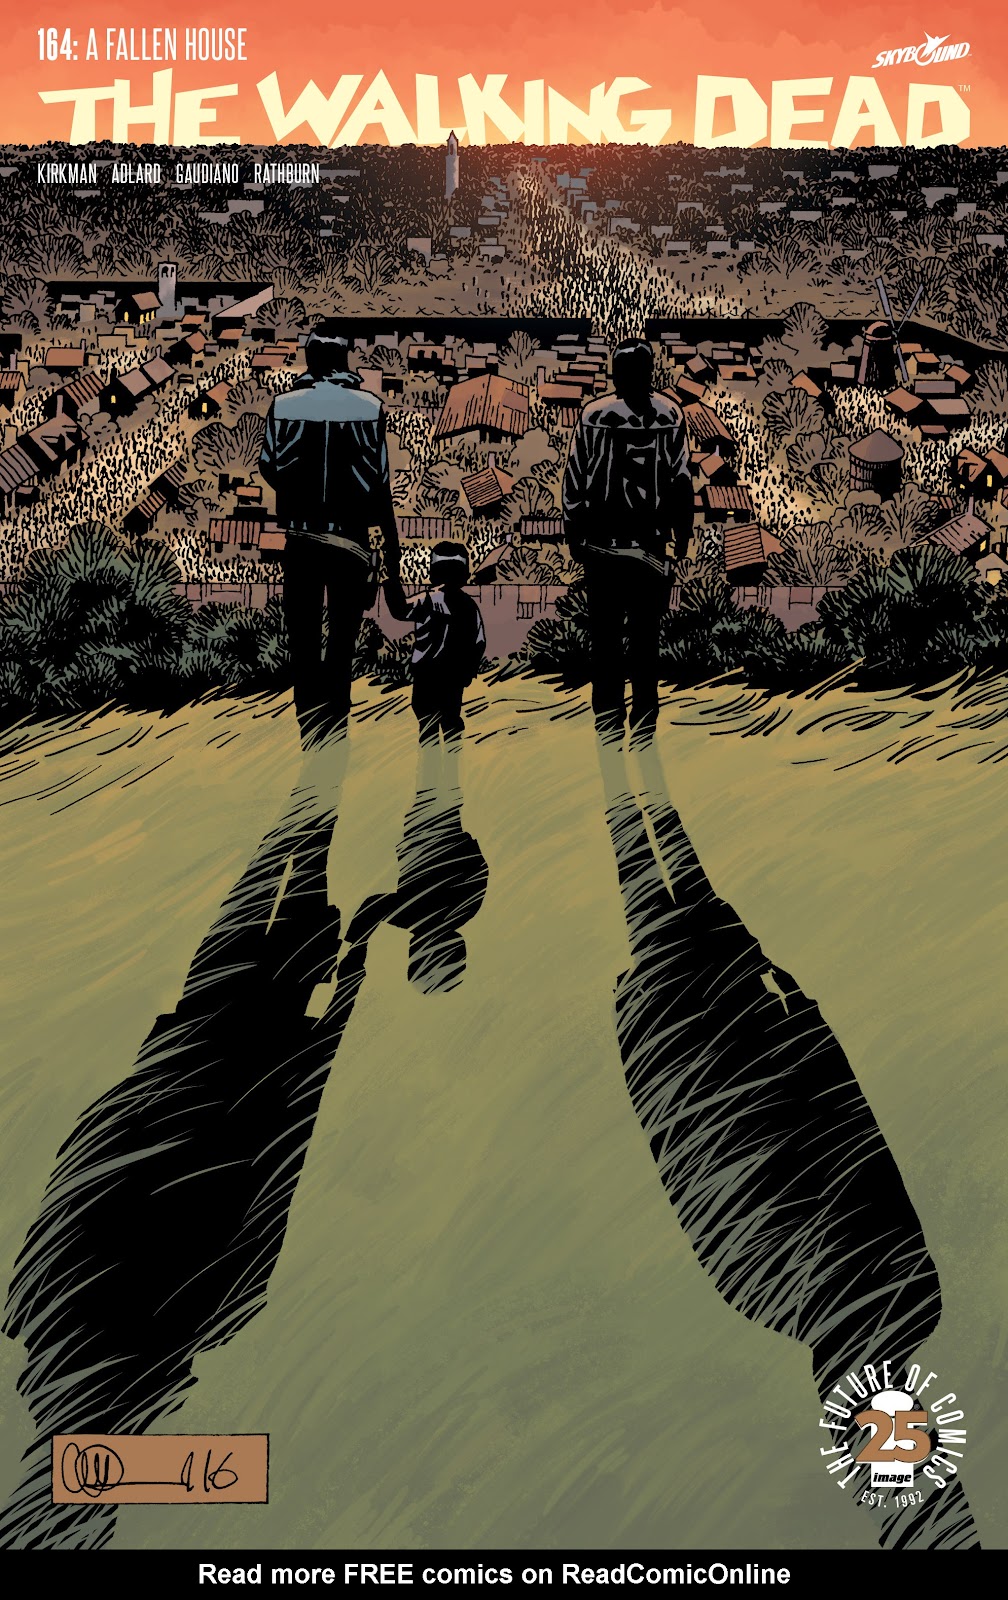 The Walking Dead 164 Page 1